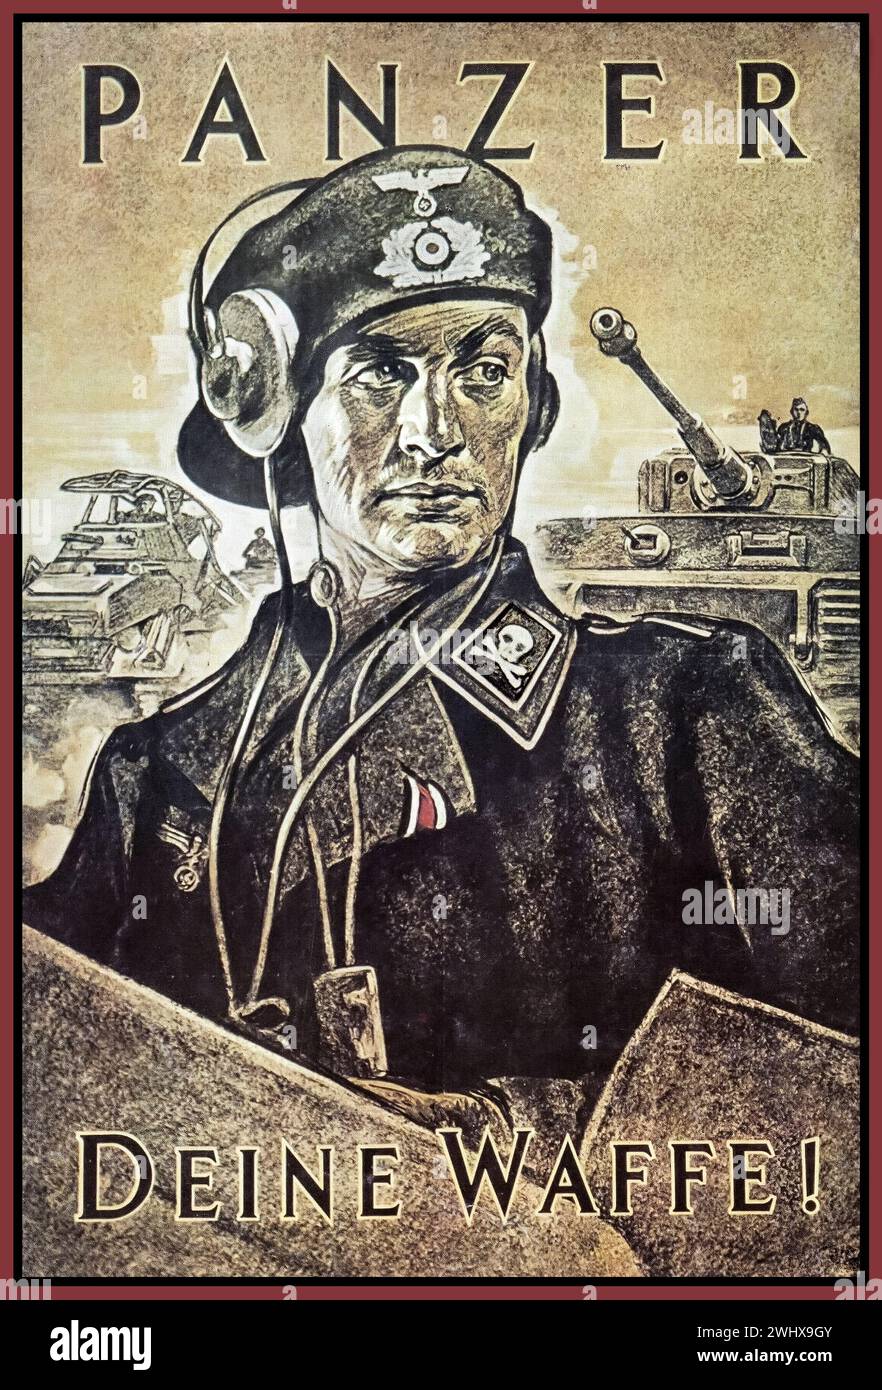 WW2 Waffen SS Panzer  ' TOTENKOPF'  Propaganda Poster titled 'YOUR WEAPON' with Nazi tank commander with SS Skull and Crossbones on his uniform 1940s Nazi Germany Stock Photo